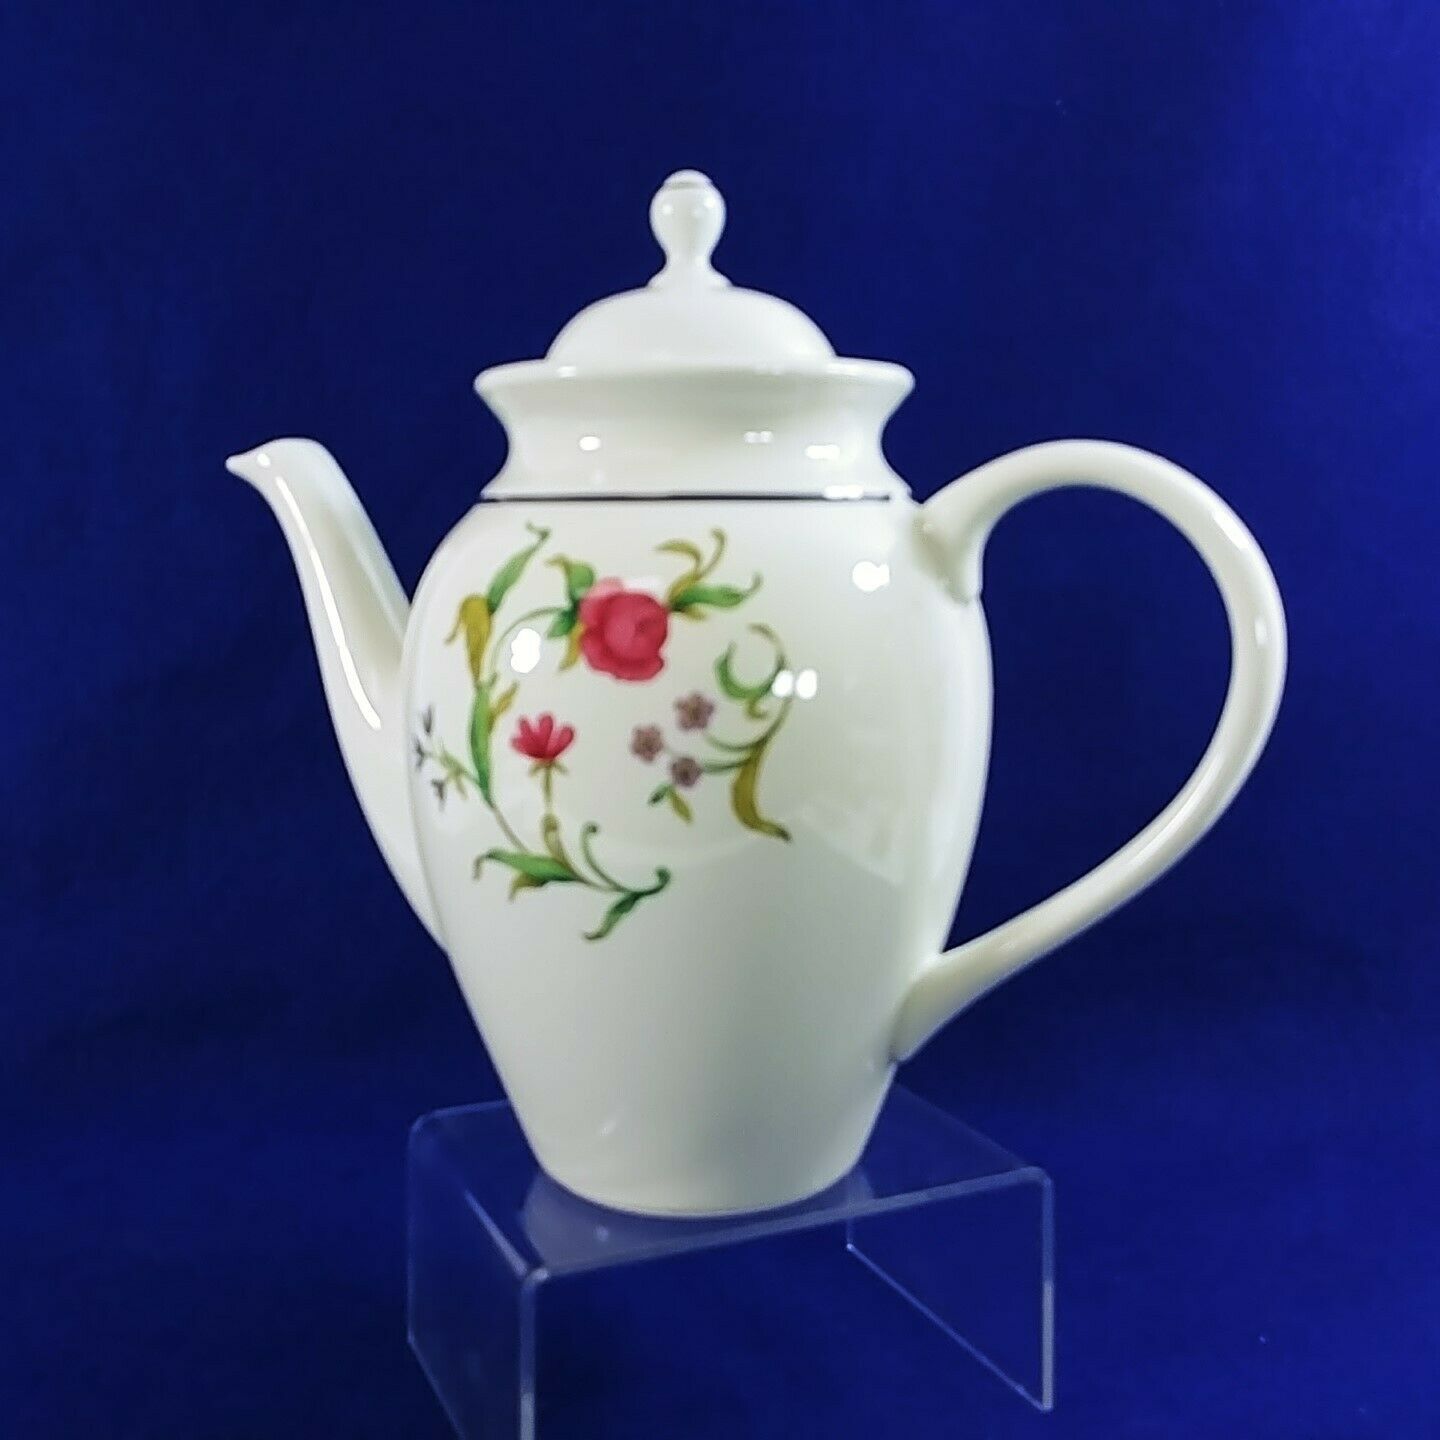 Primary image for Lenox Coffee Pot with Lid Rose Garden Casual Images by Lenox Made in Brazil